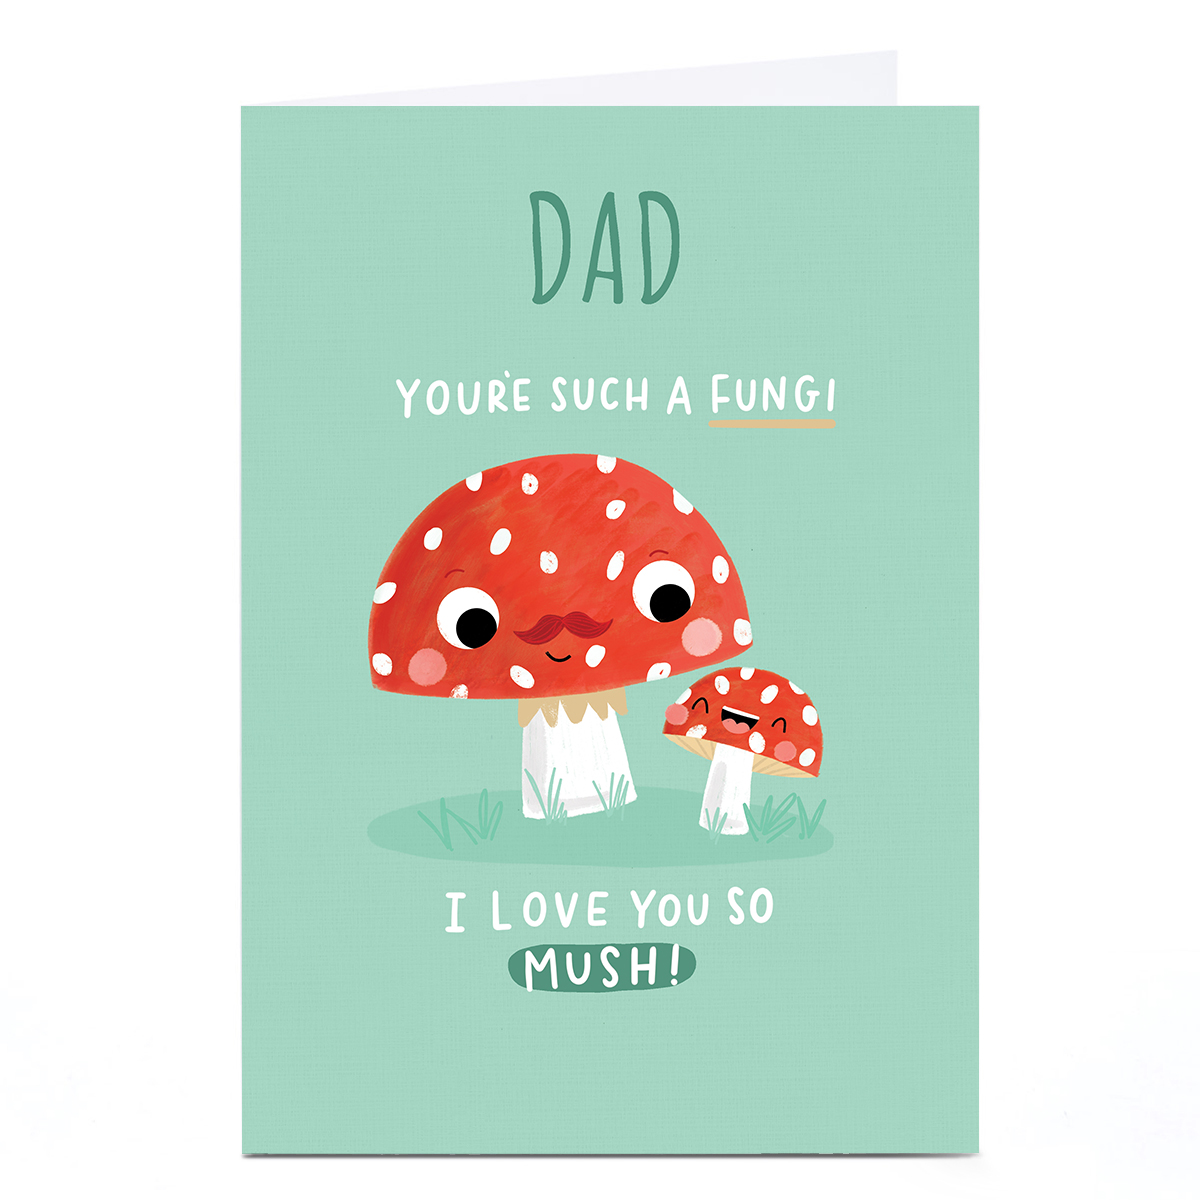 Personalised Jess Moorhouse Father's Day Card - Fungi